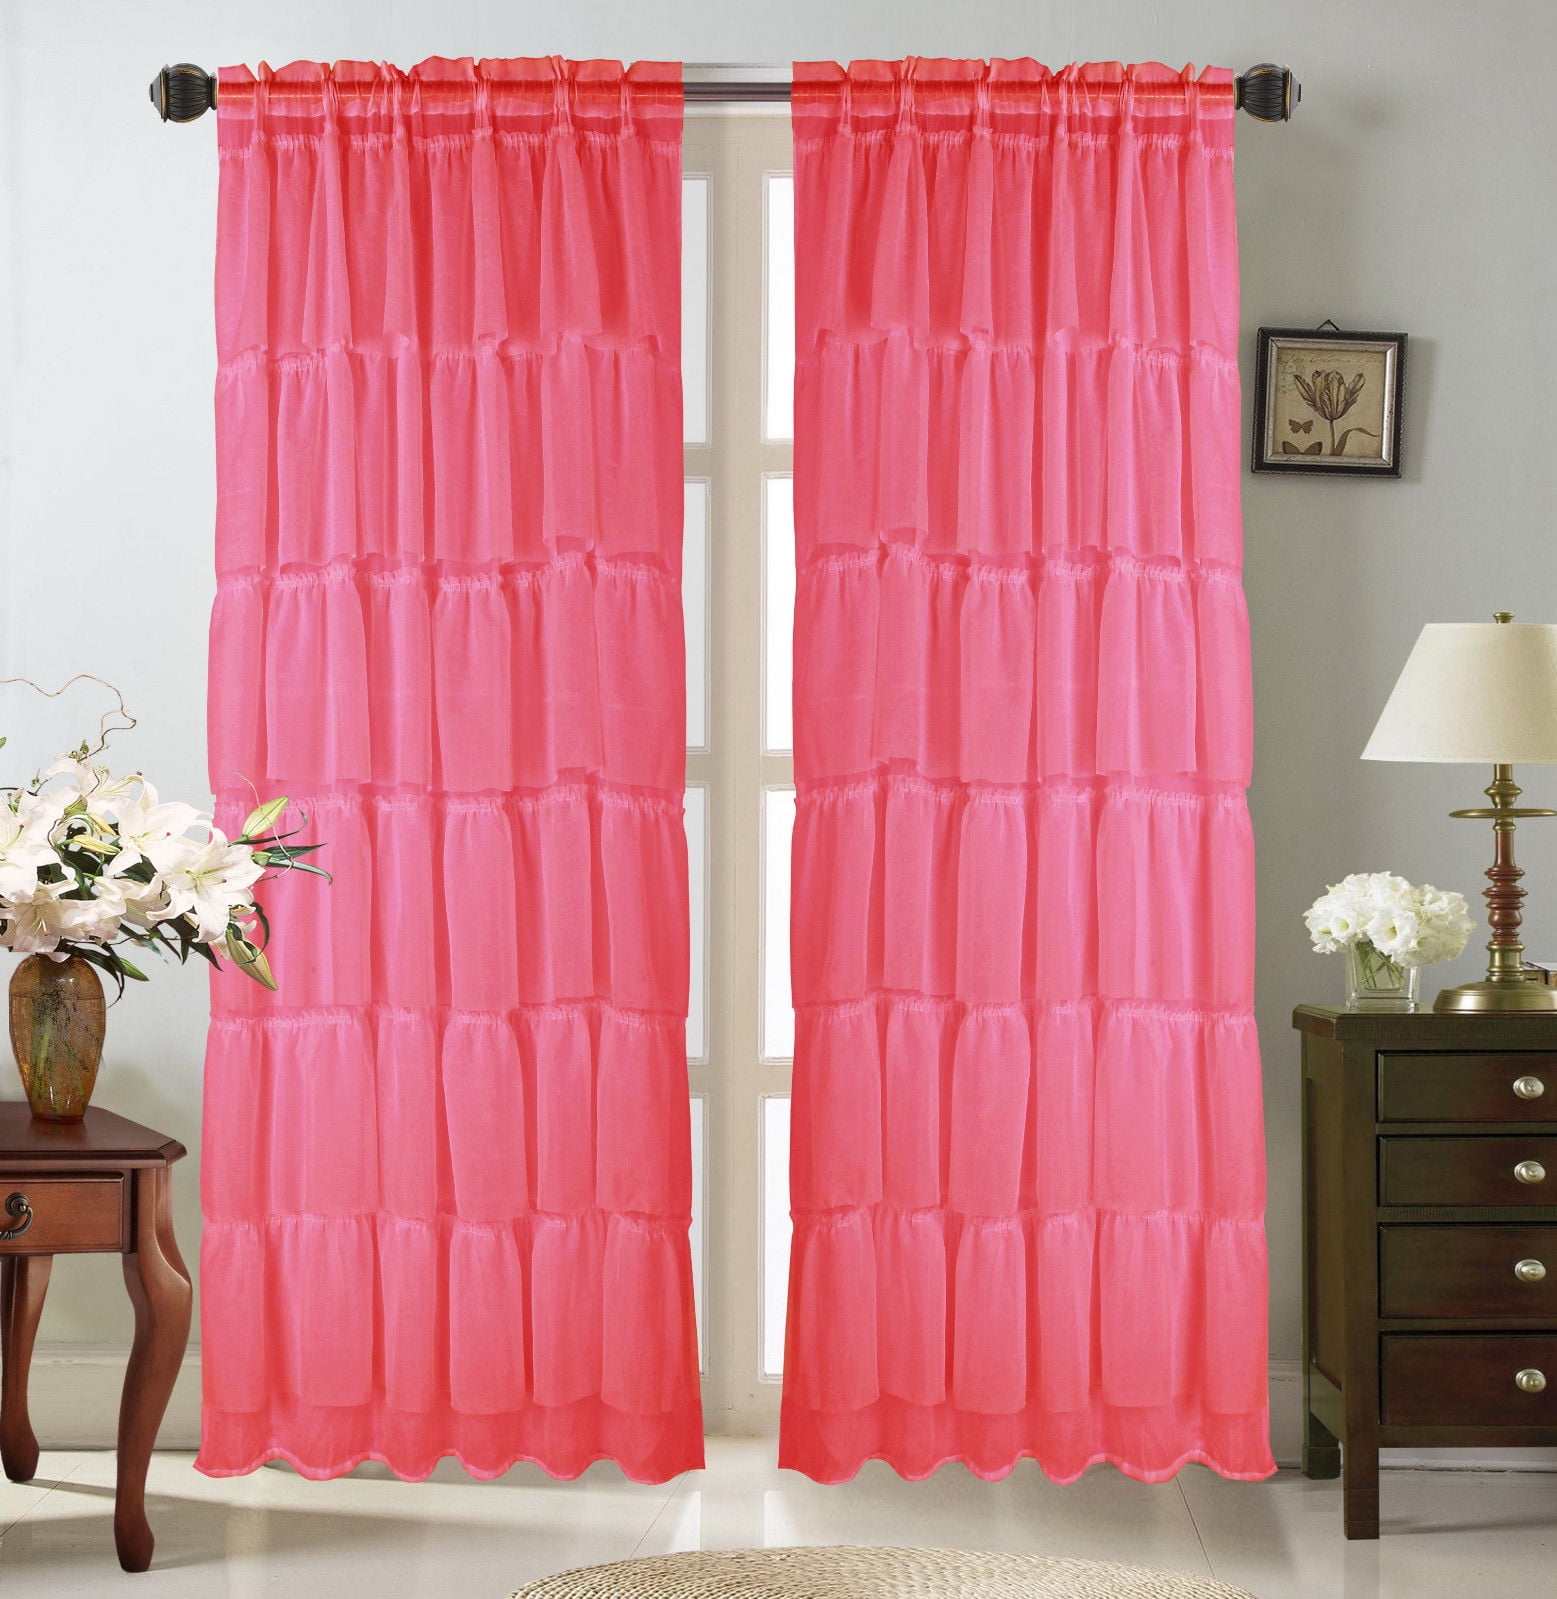 1PC Gypsy Window Curtain Ruffled Sheer Layer Crushed Drape Multiple Color &Sizes 